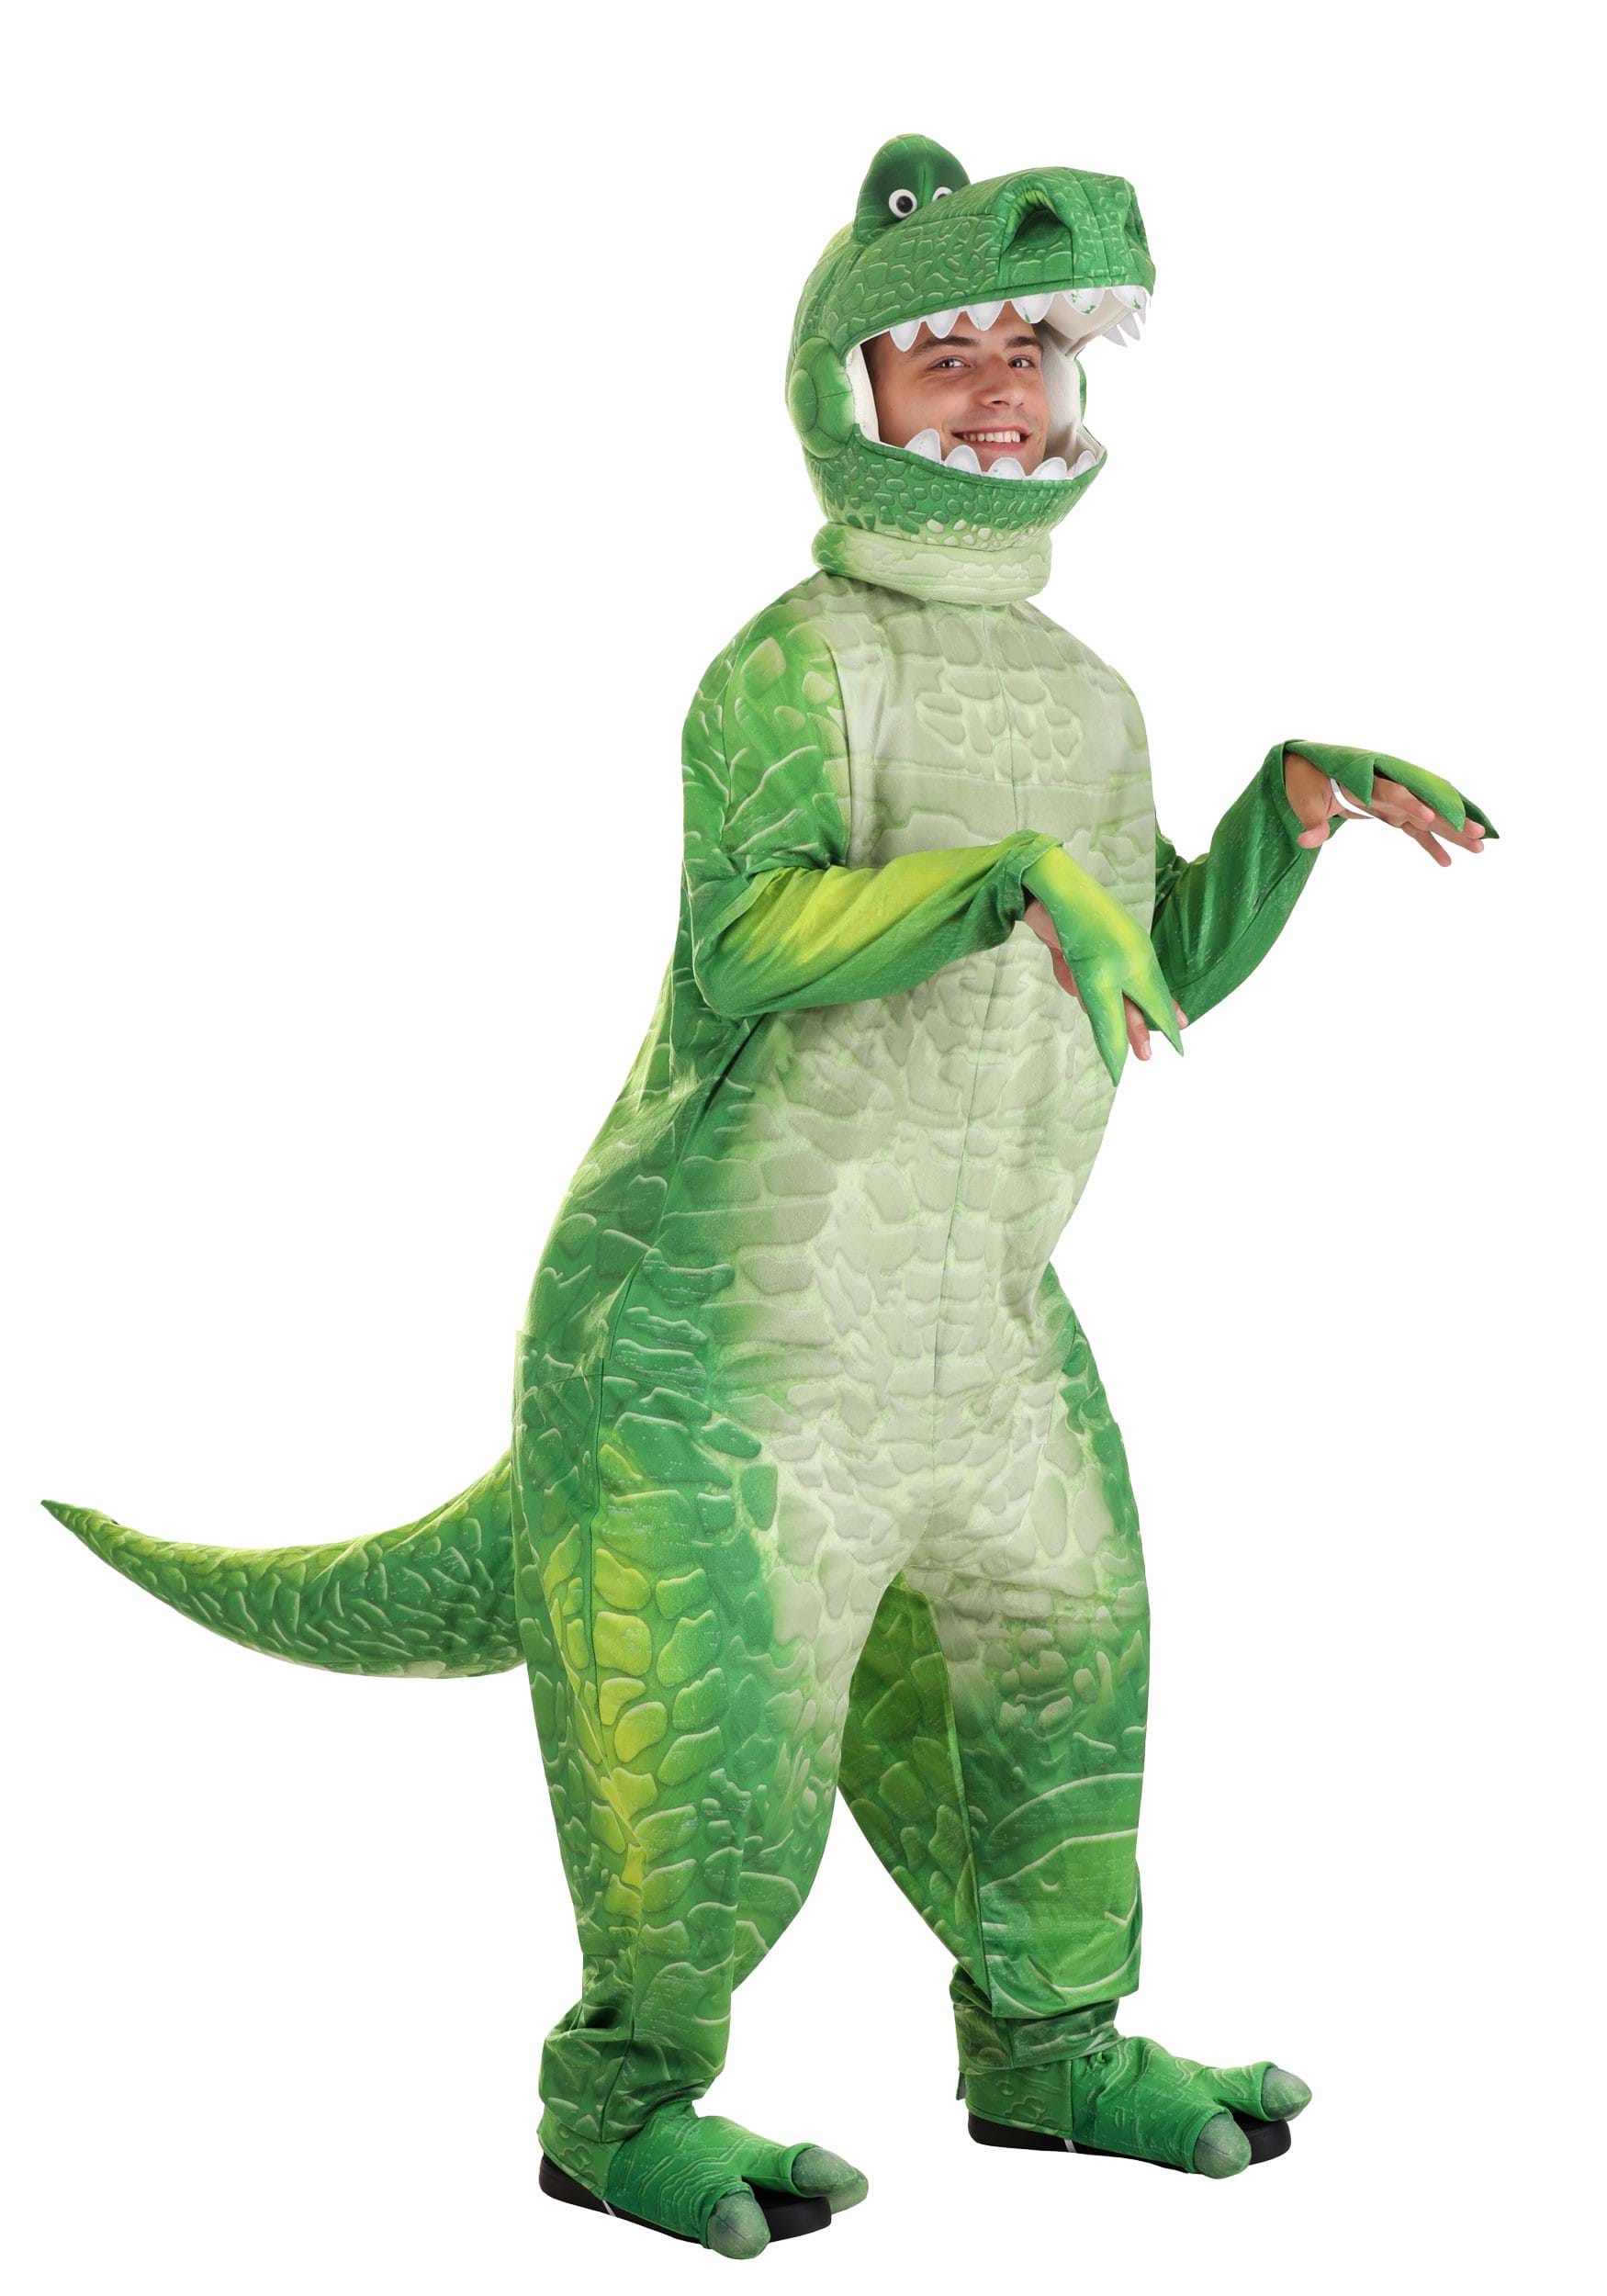 Photos - Fancy Dress Deluxe FUN Costumes  Toy Story Rex Costume for Adults | Pixar Costumes Gree 